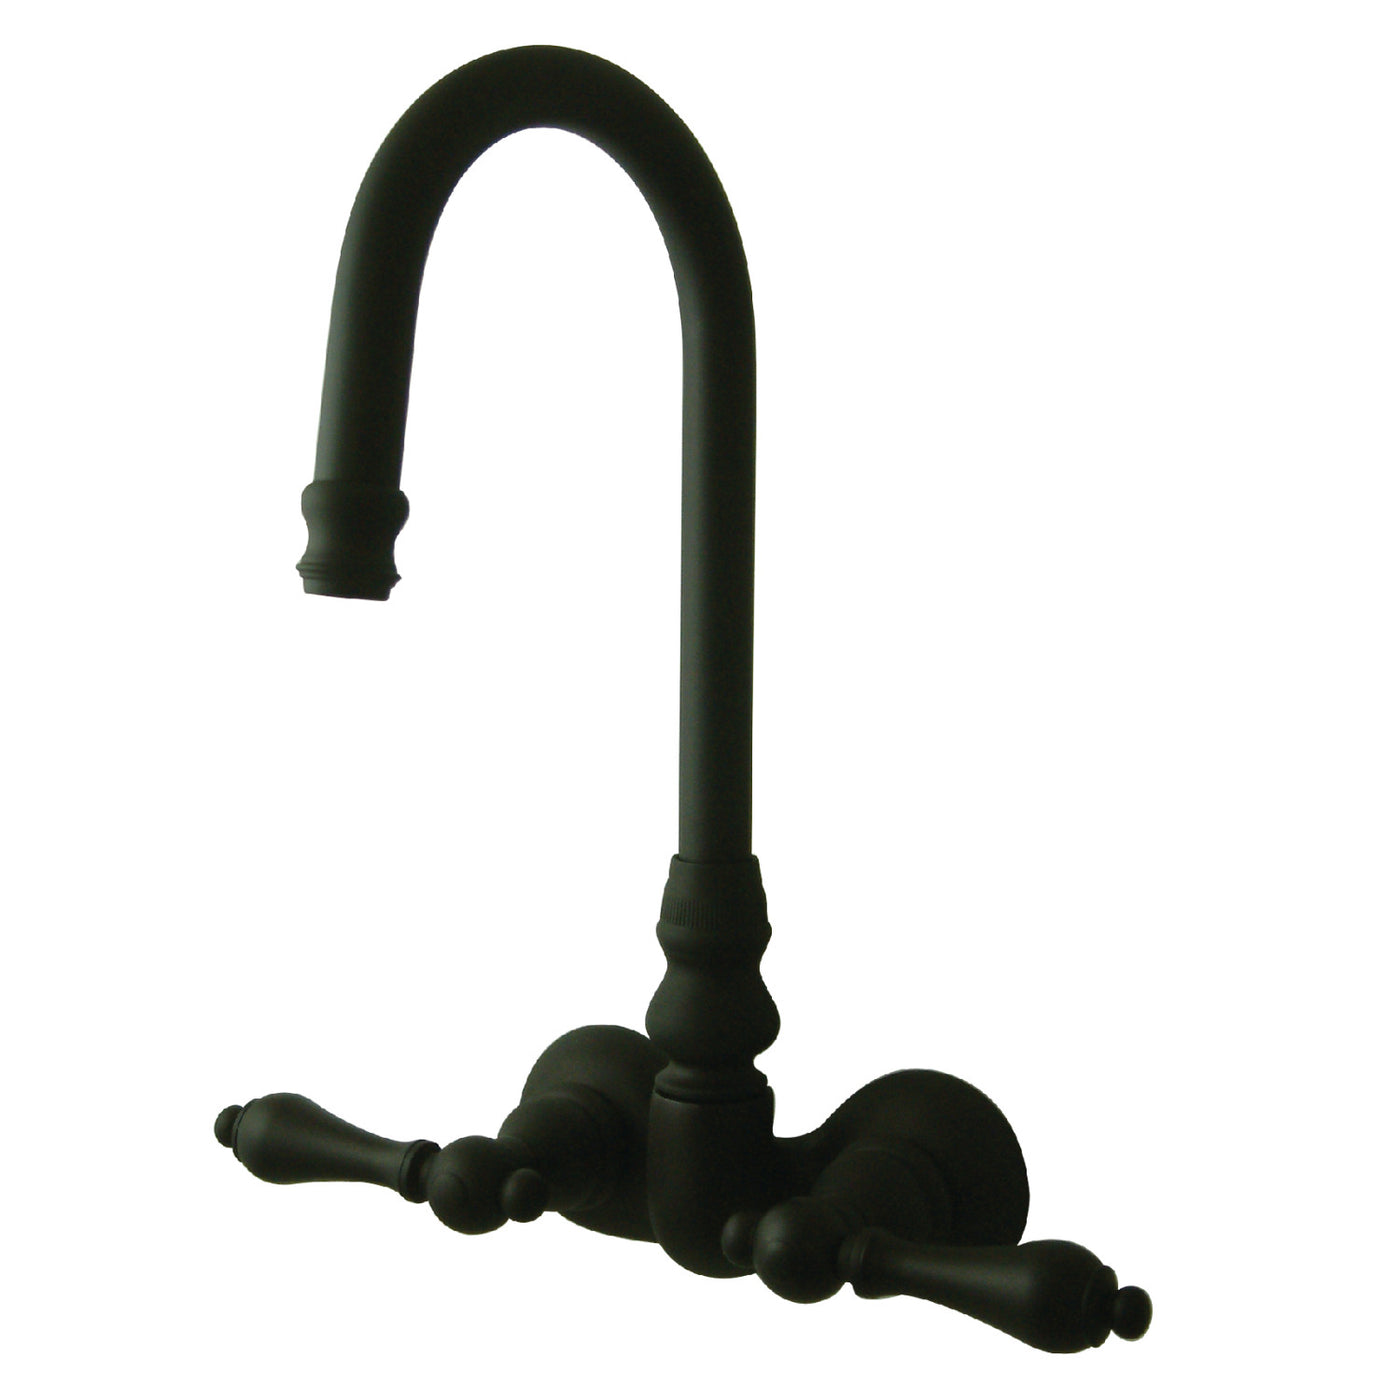 Elements of Design DT0715AL 3-3/8-Inch Wall Mount Tub Faucet, Oil Rubbed Bronze